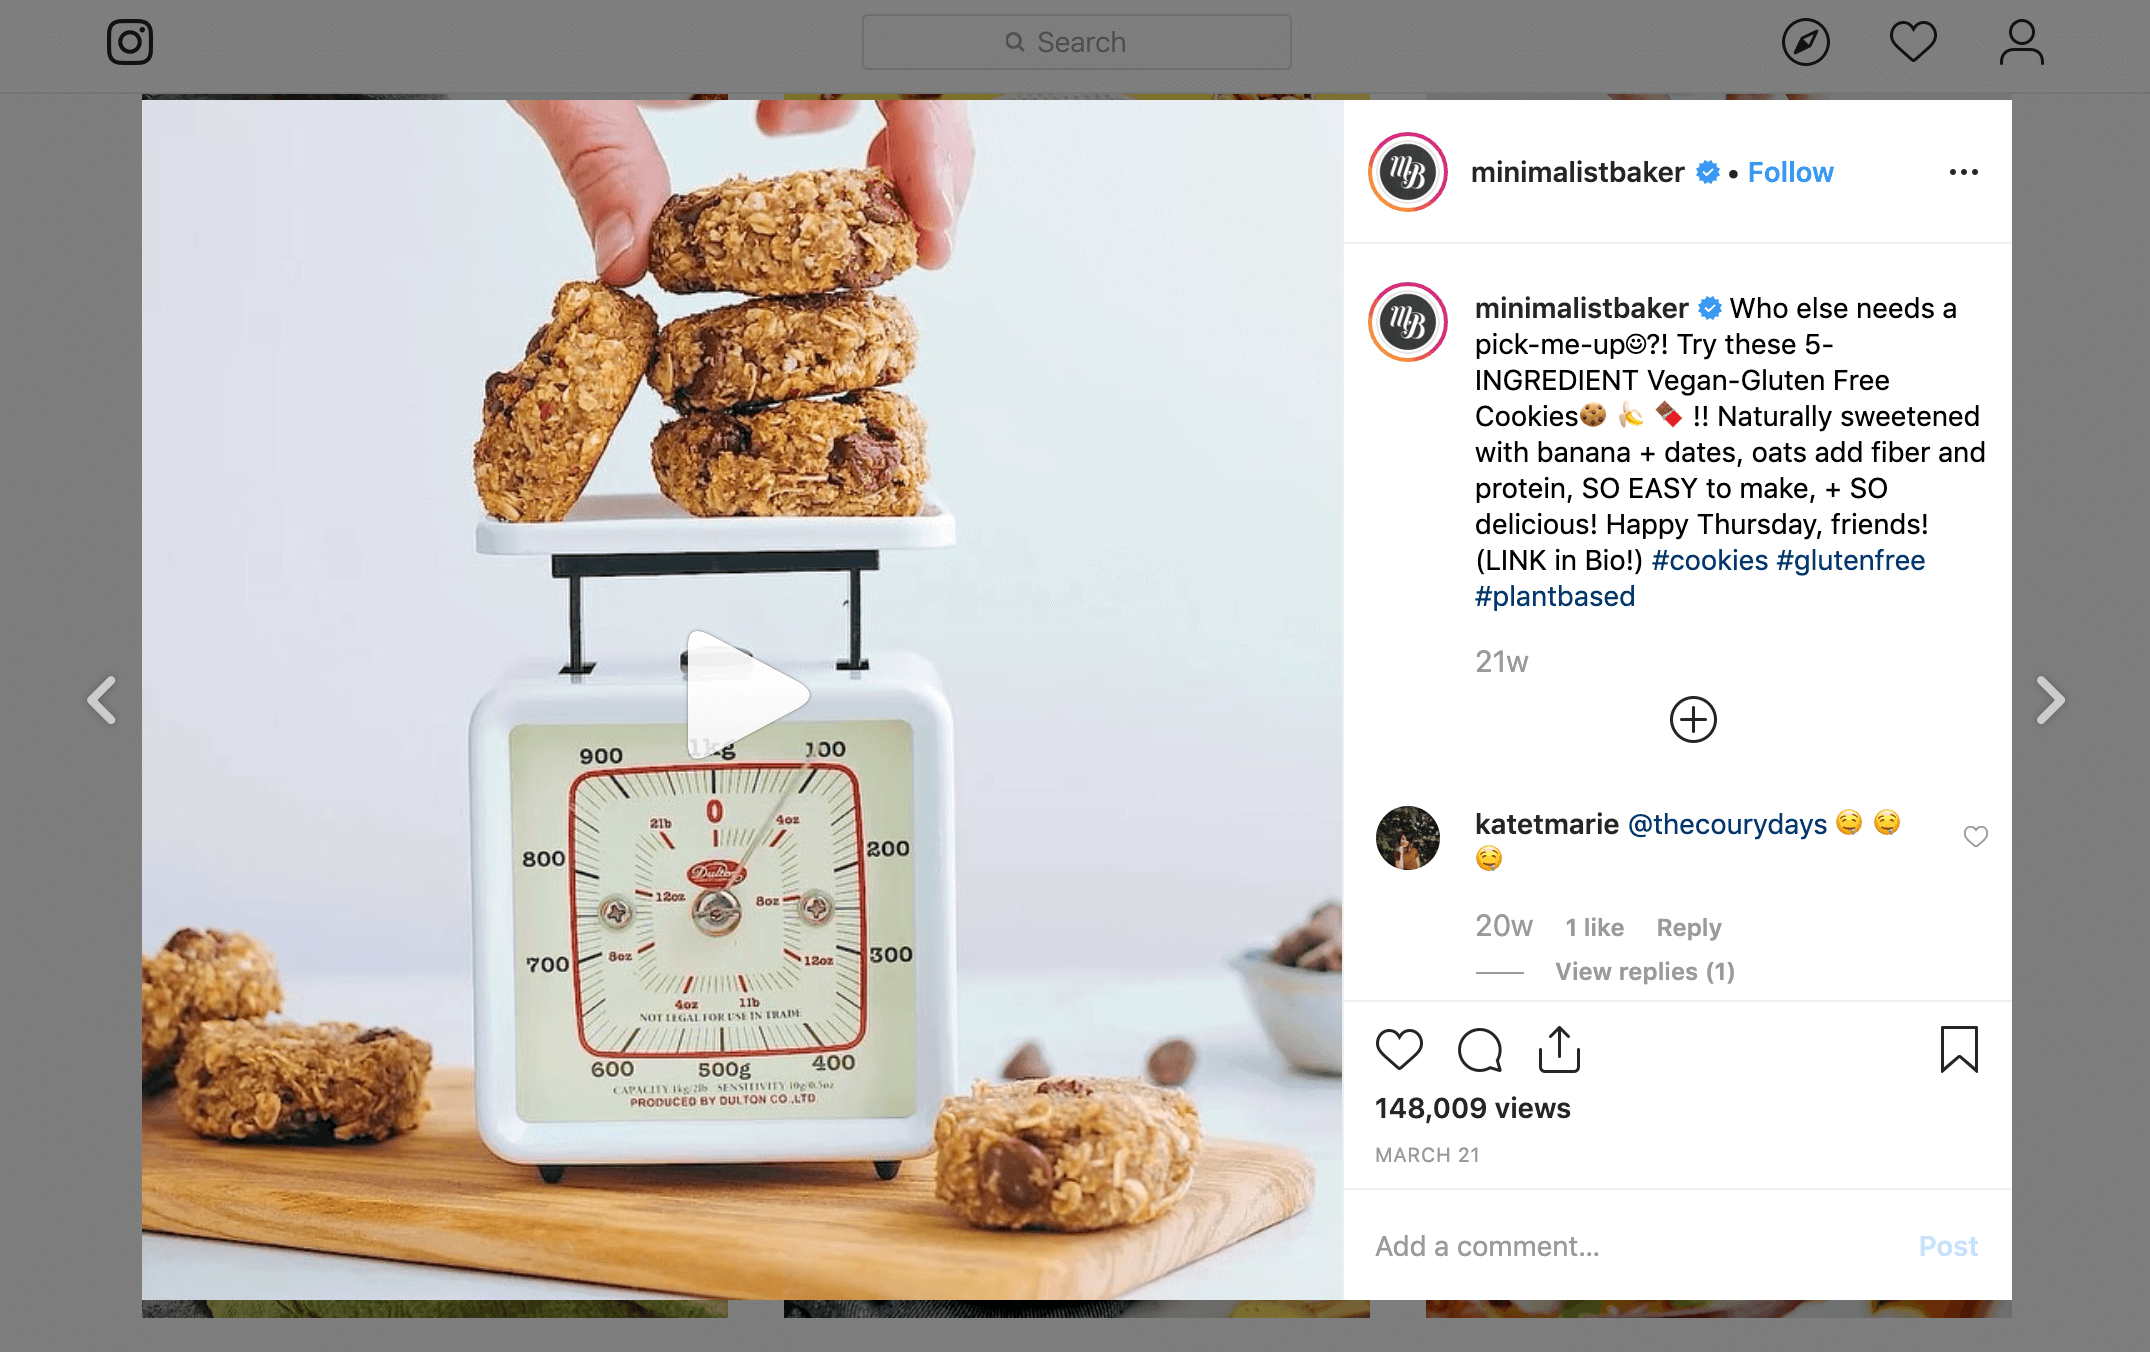 An example of an Instagram post with affiliate links.